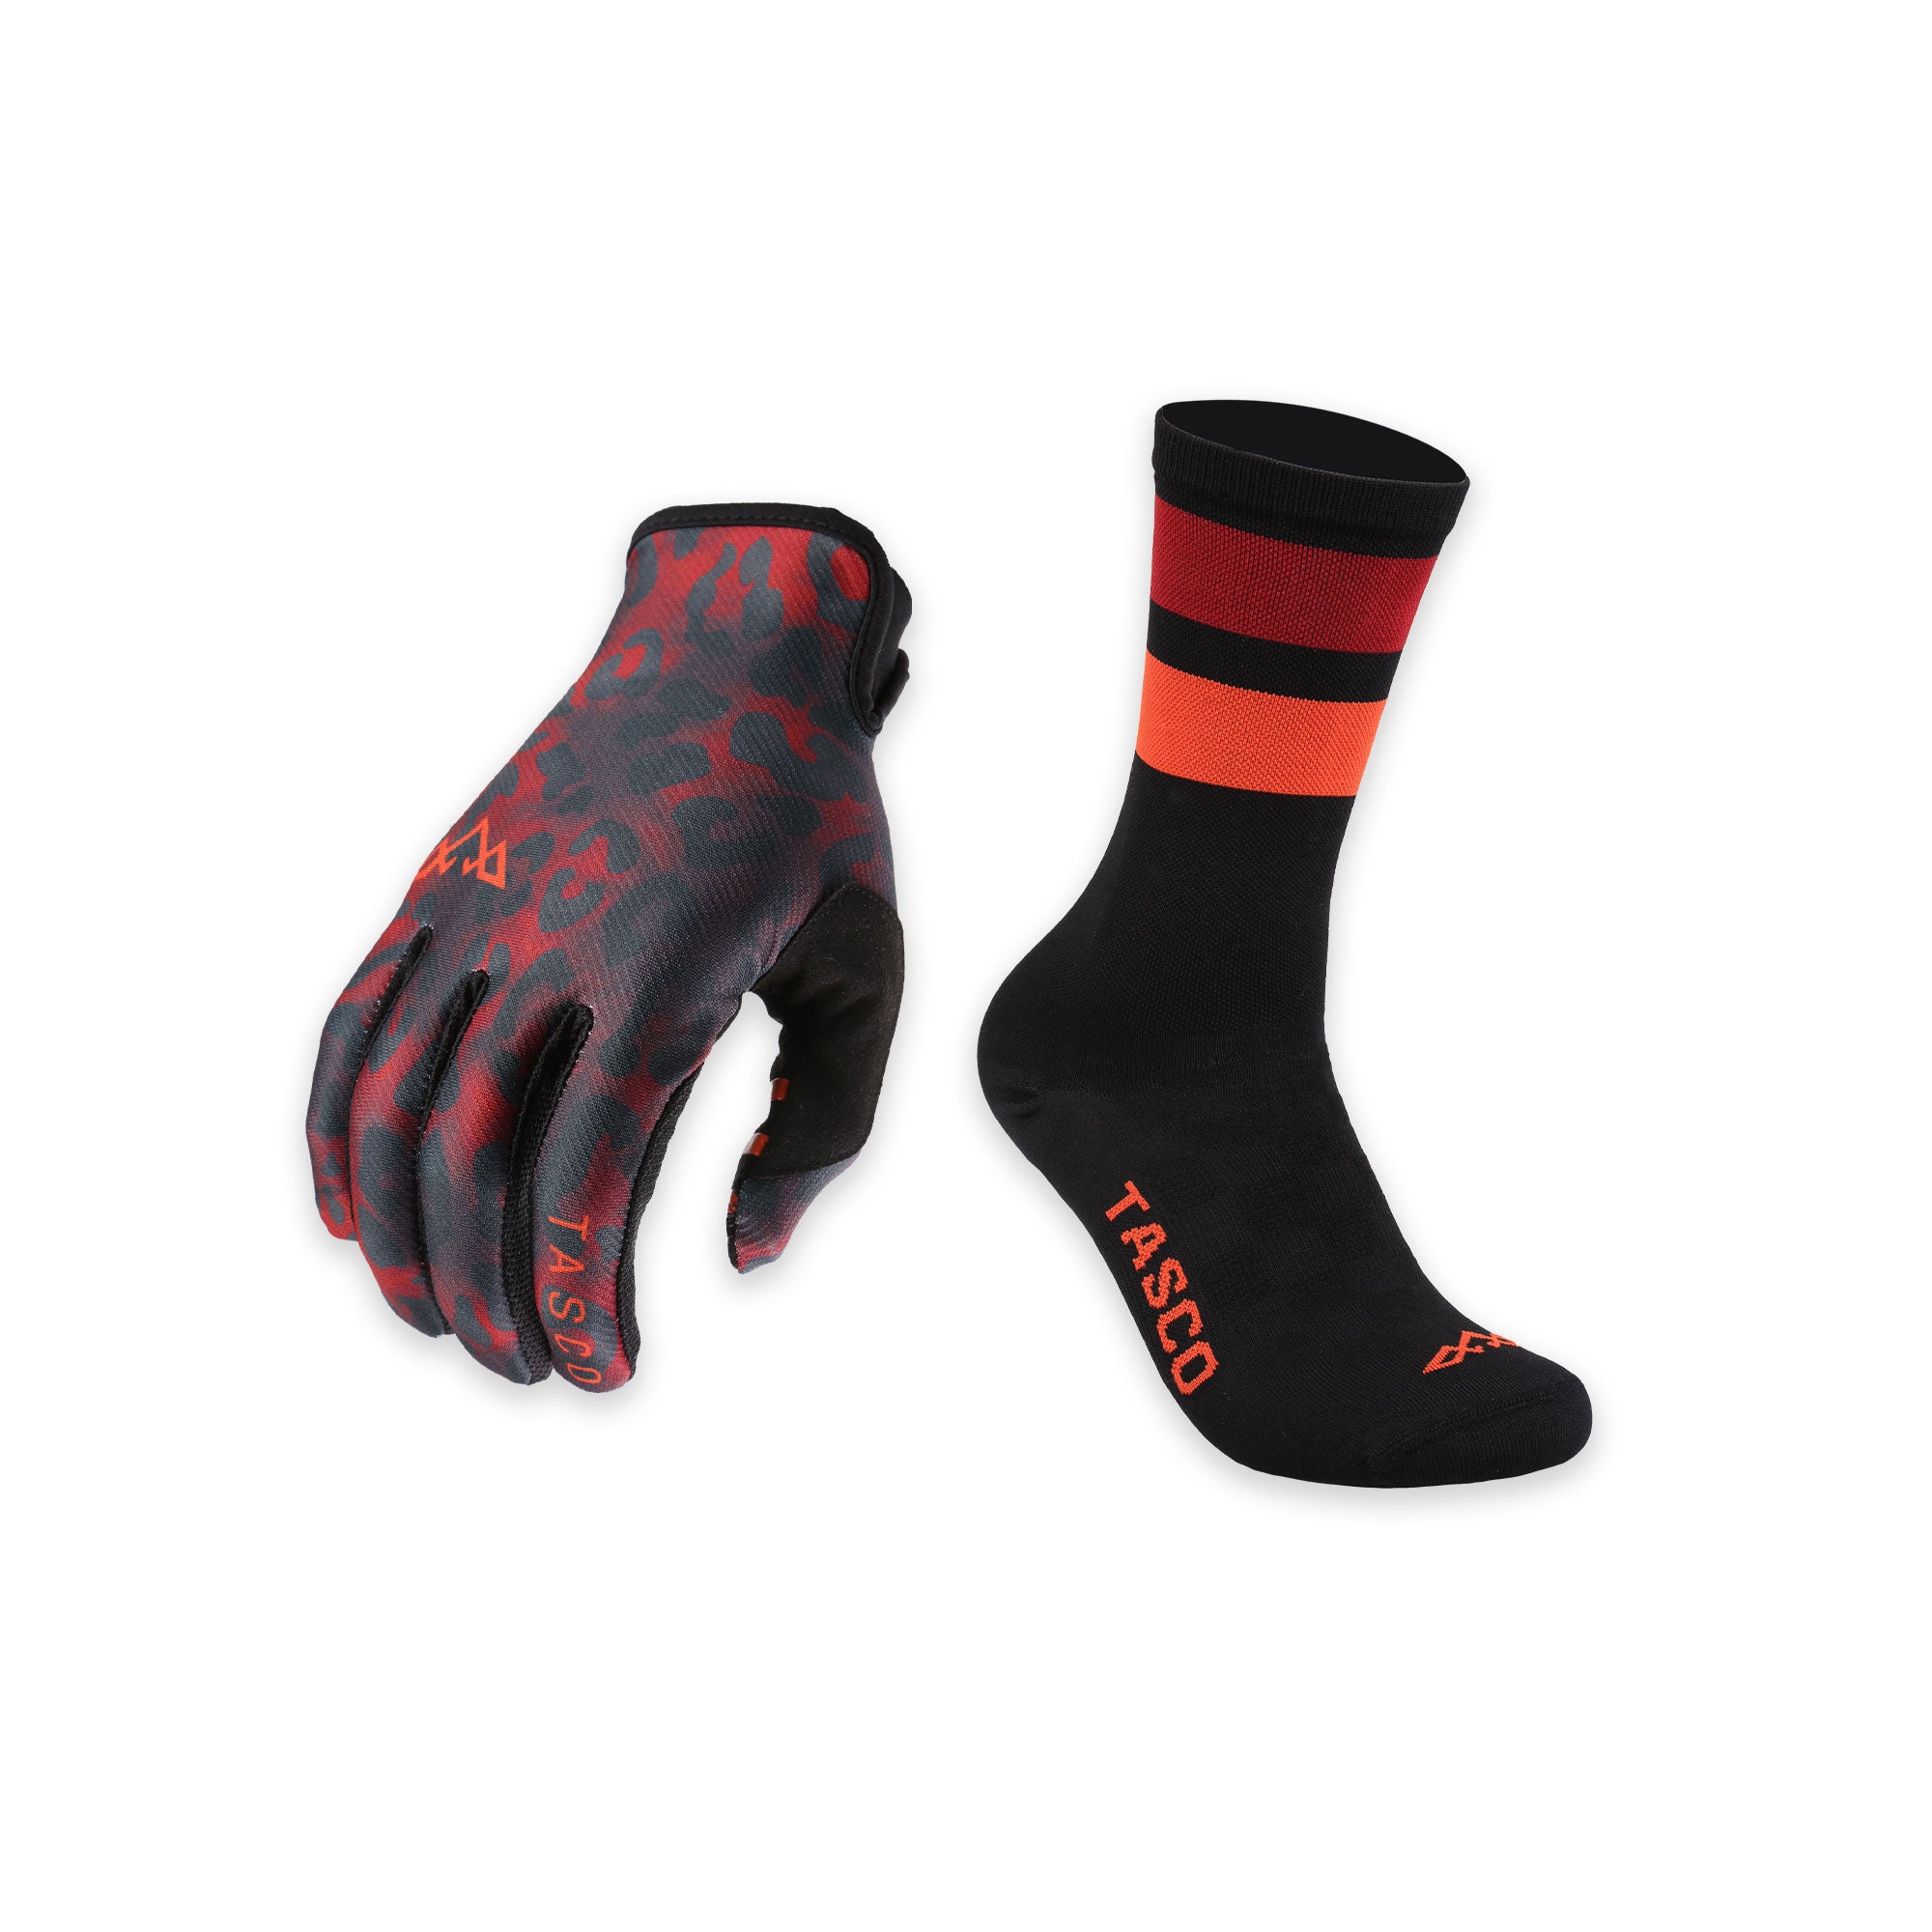 Wildside small batch glove and sock kit